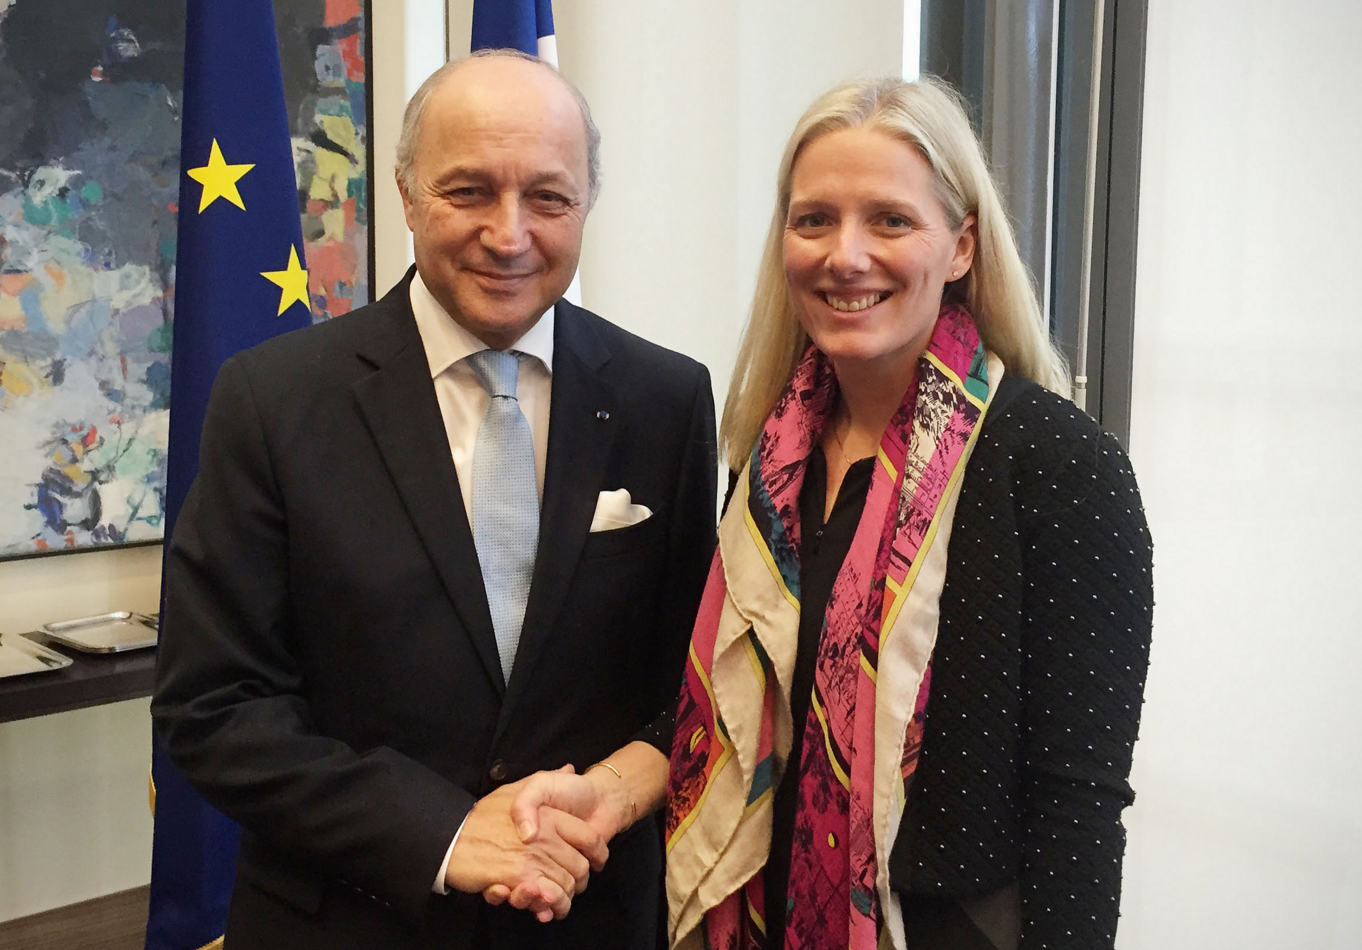 Minister McKenna meeting with Laurent Fabius, French Minister of Foreign Affairs and International Development, at pre-COP